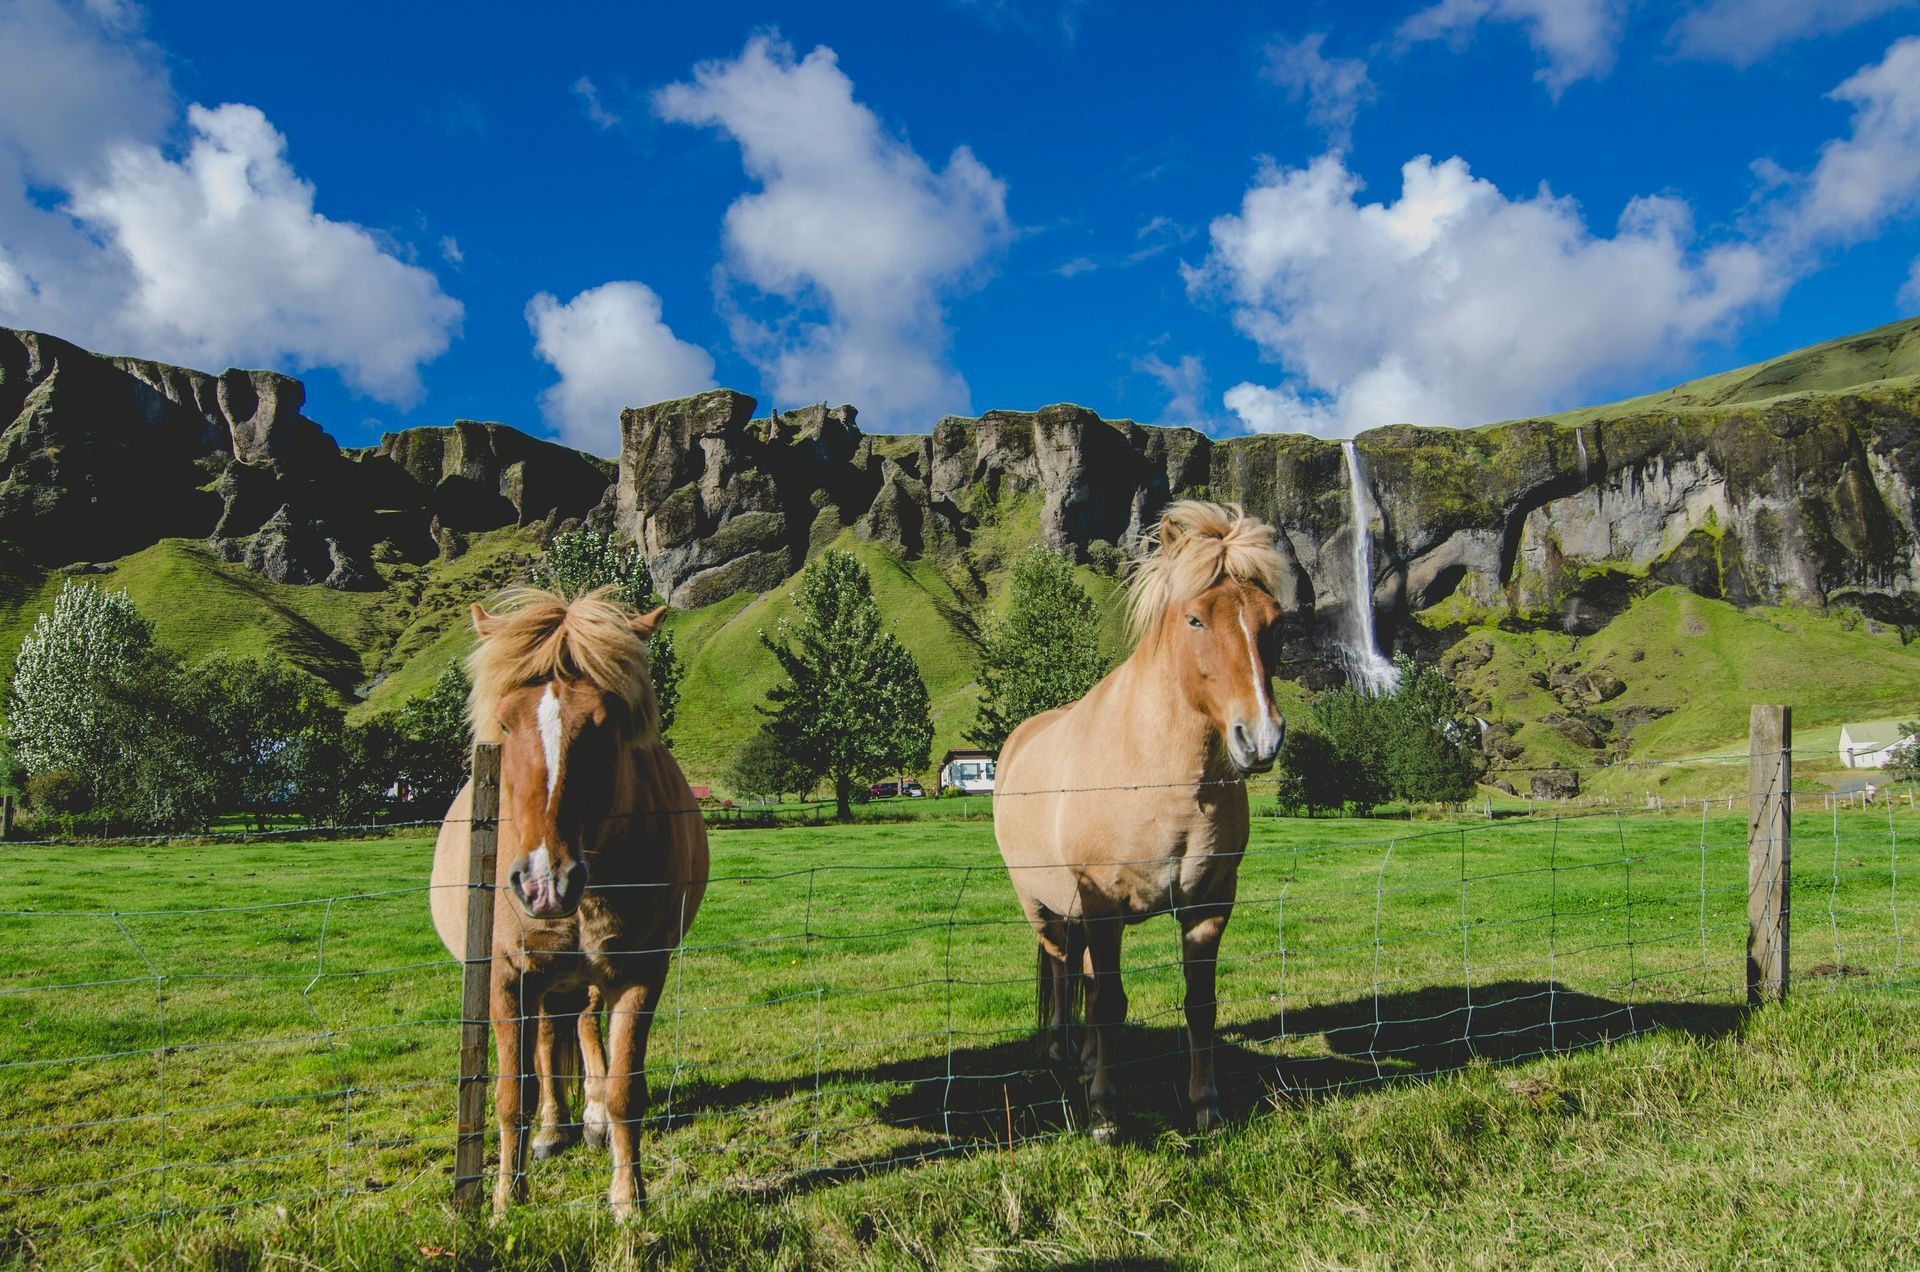 two icelandic horses are standing in a grassy field with a waterfall in the background.